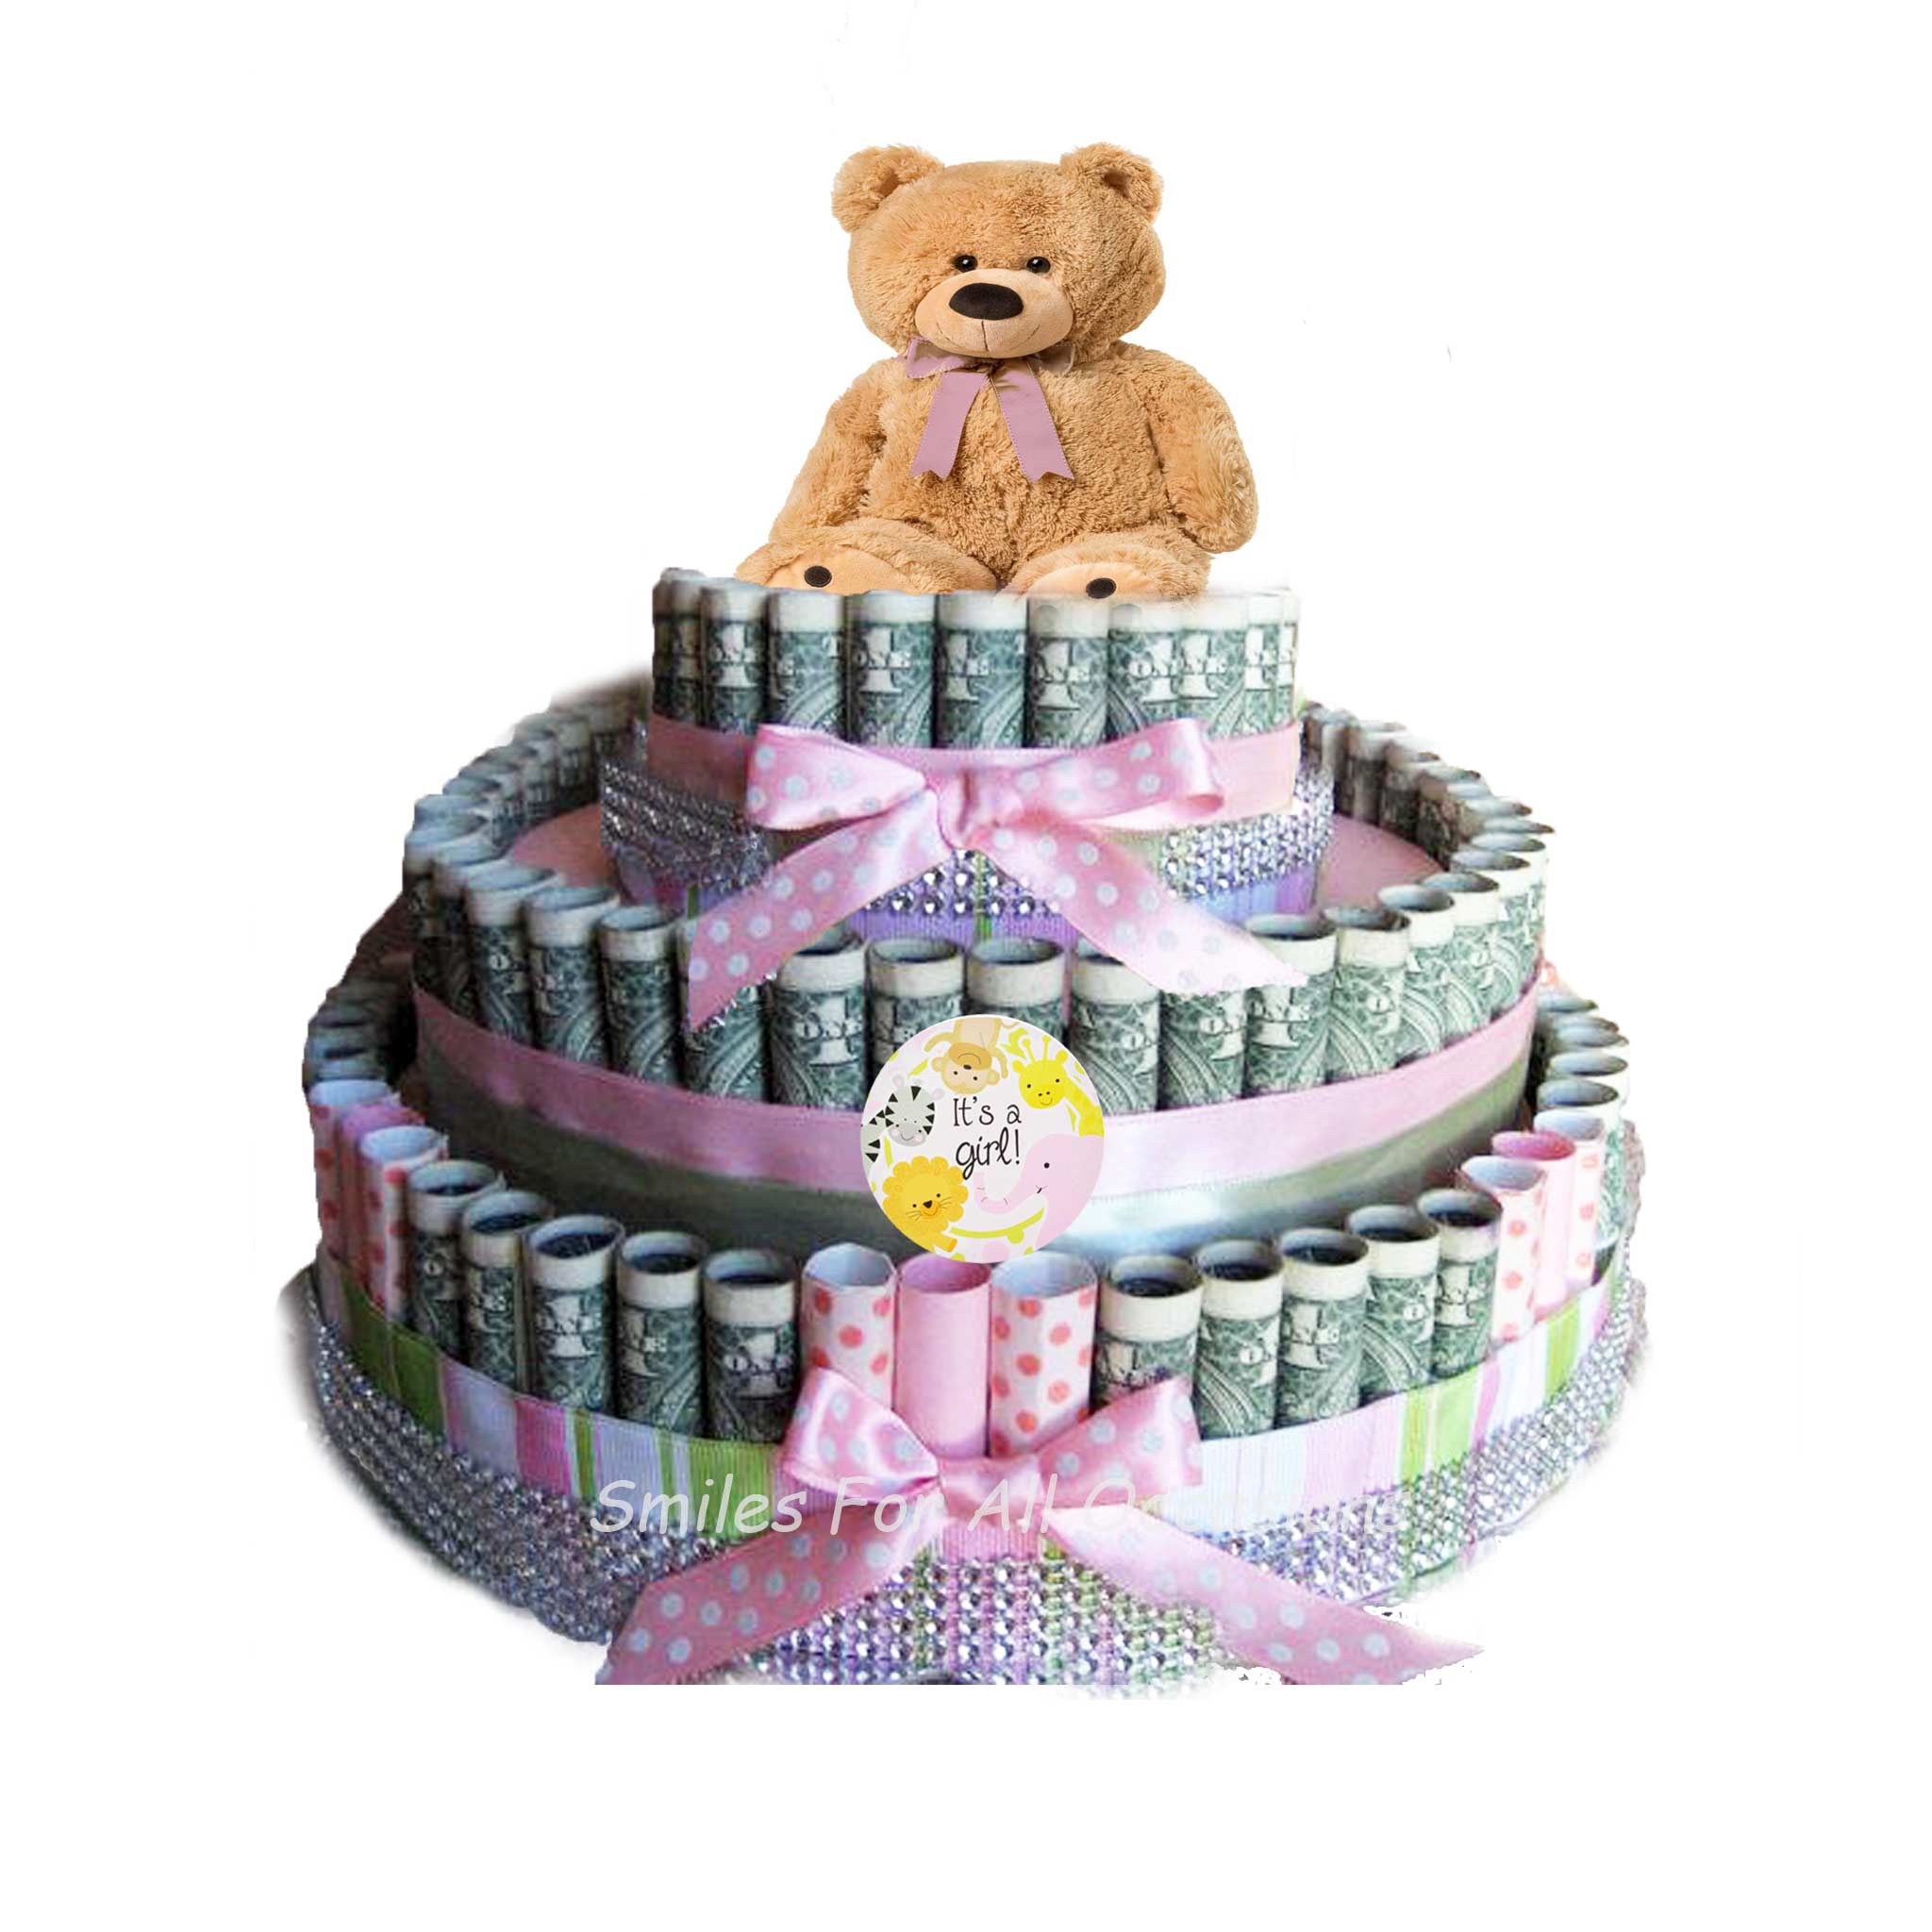 Wallet with edible money cake. - Centrepiece Cakes